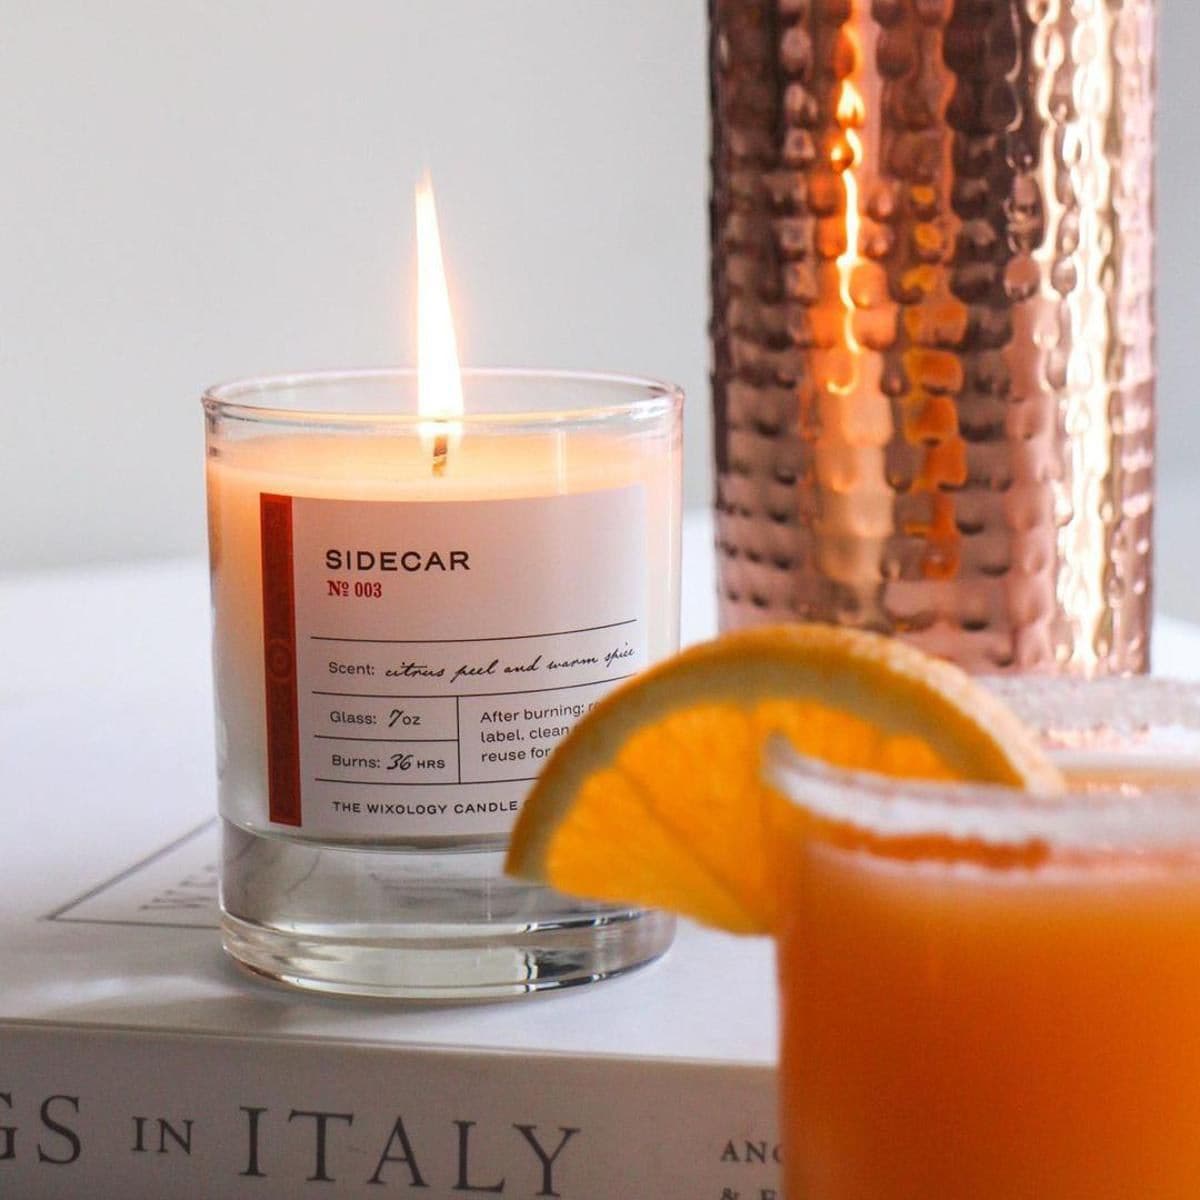 Sidecar Candle by Wixology Candle Co.